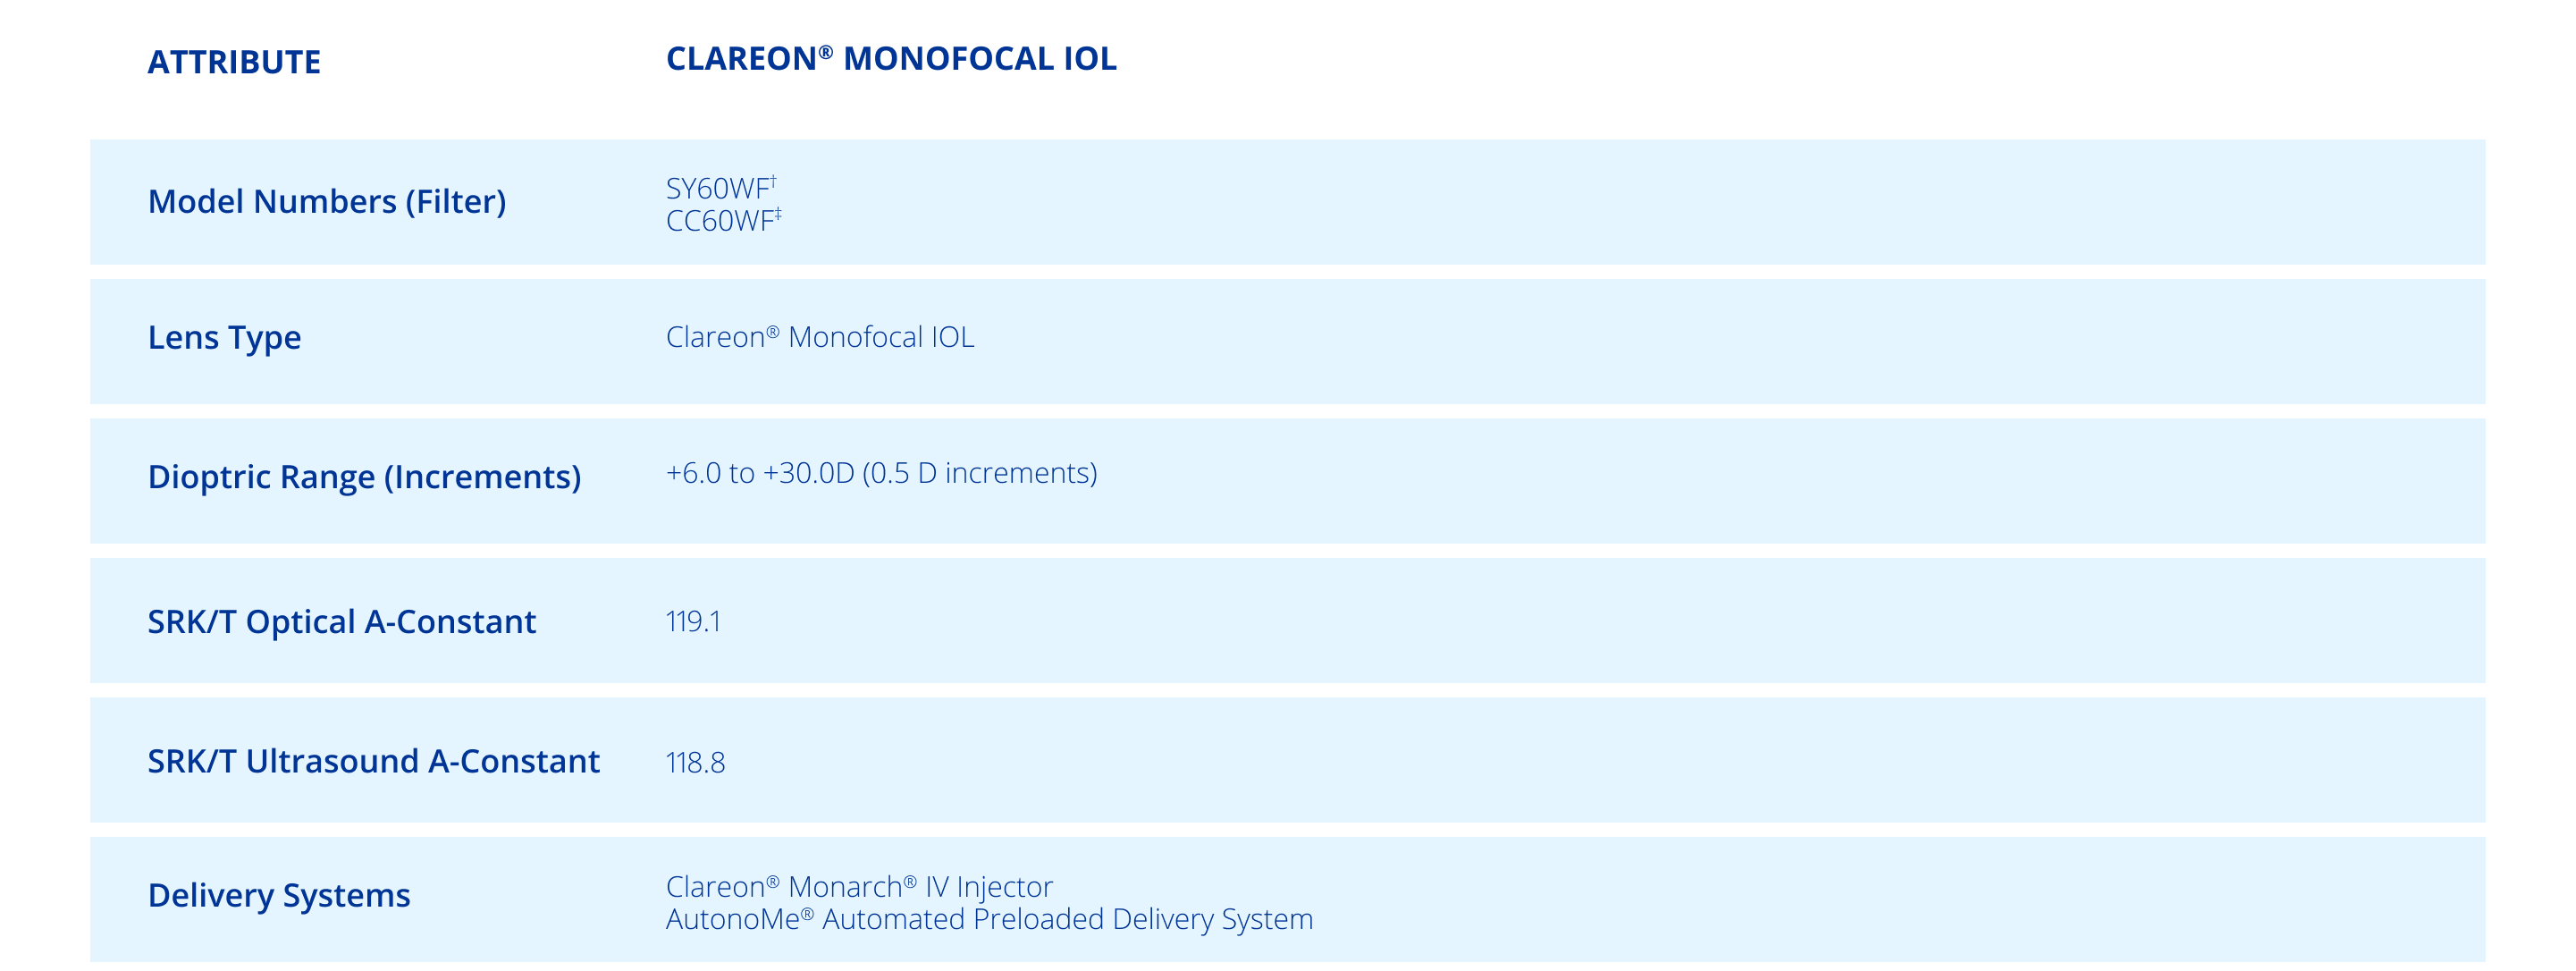 Table of specifications for Clareon® Monofocal IOL